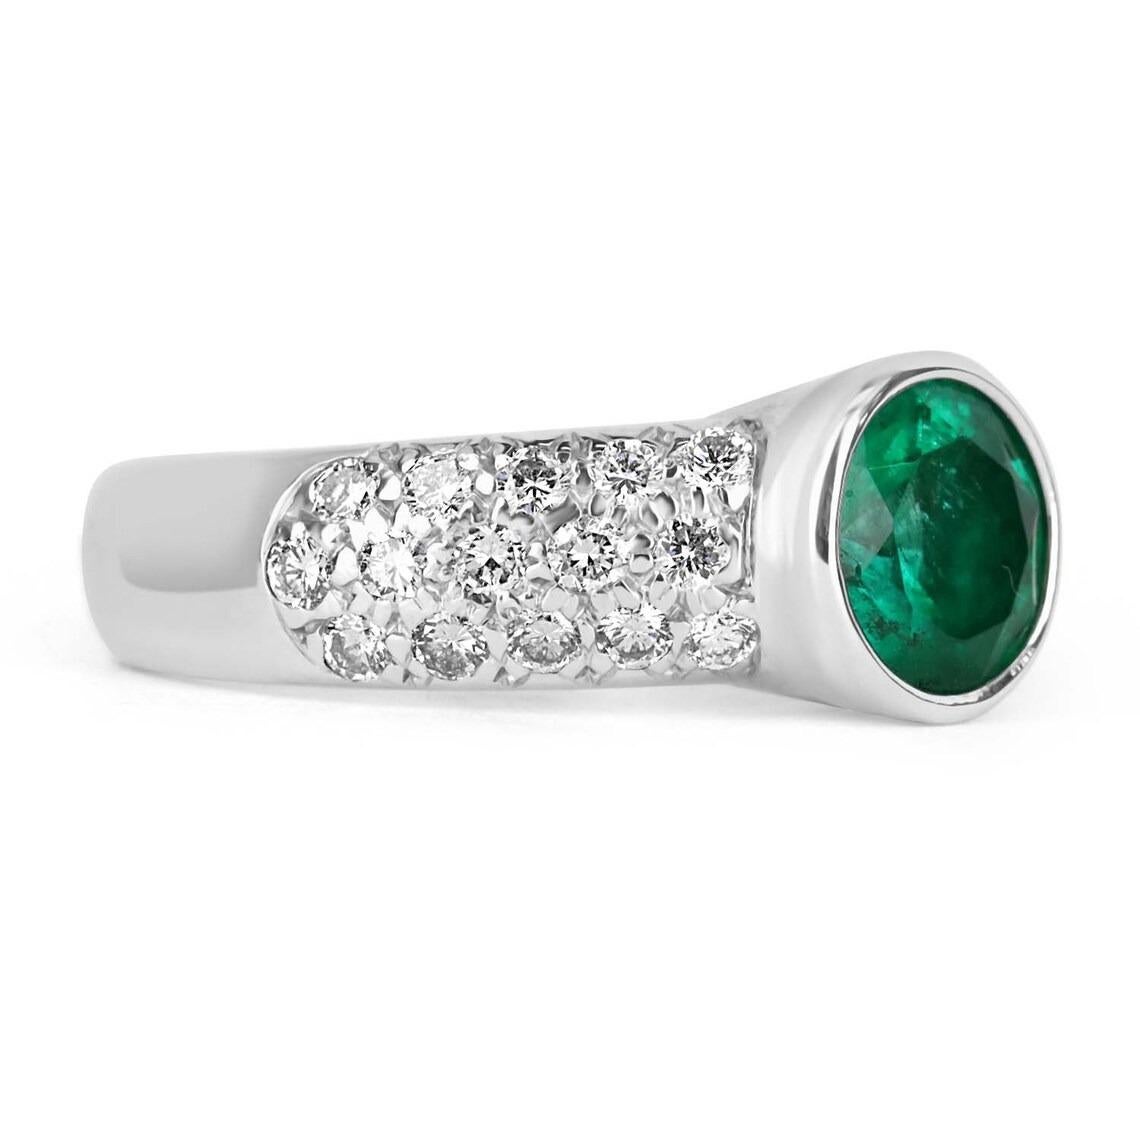 Featured is a stunning emerald and diamond statement ring. The center stone carries 1.74-carats of pure green Colombian emerald beauty. This natural gemstone is bezel set and displays a gorgeous vivid green color, excellent luster, and triple-A